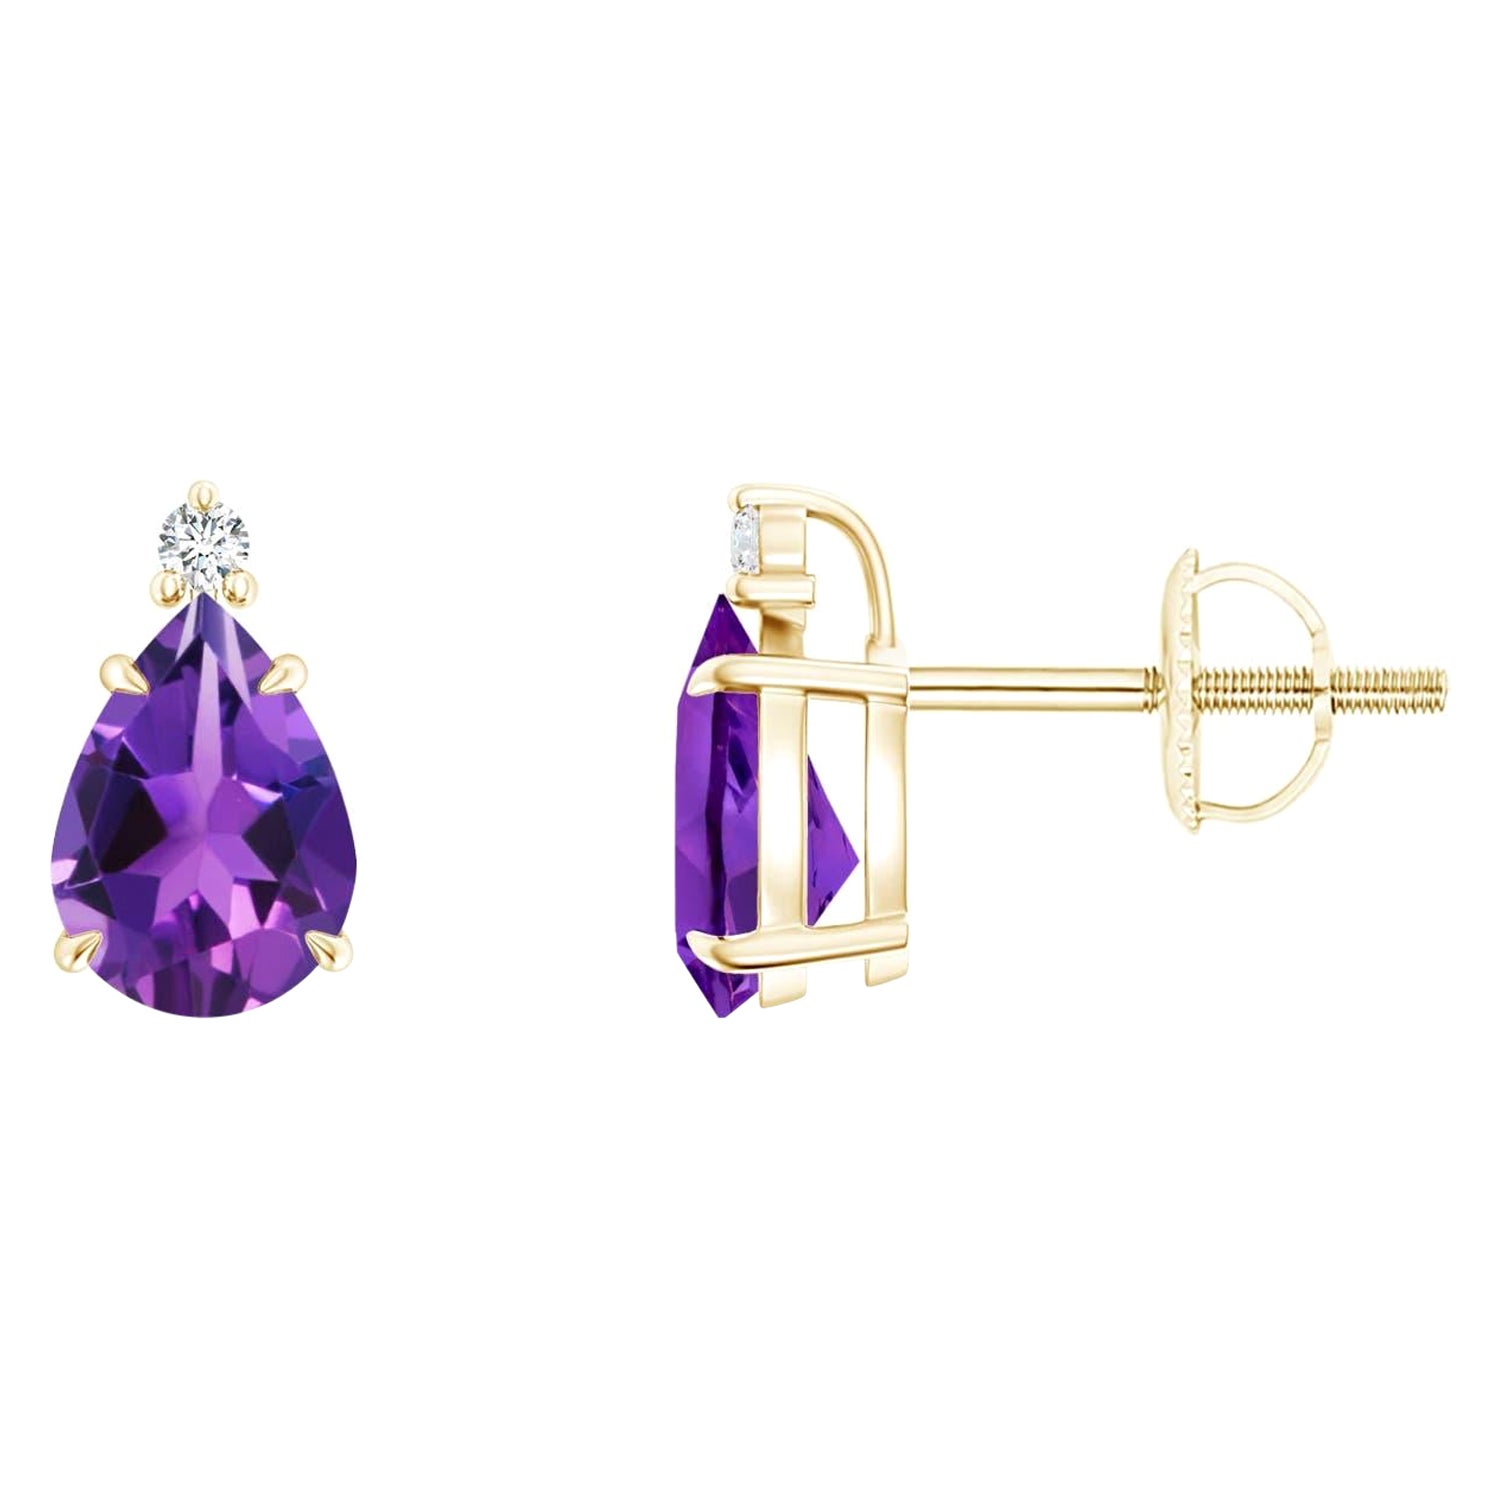 Natural Claw-Set Pear 1.2ct Amethyst Solitaire Earrings in 14K Yellow Gold